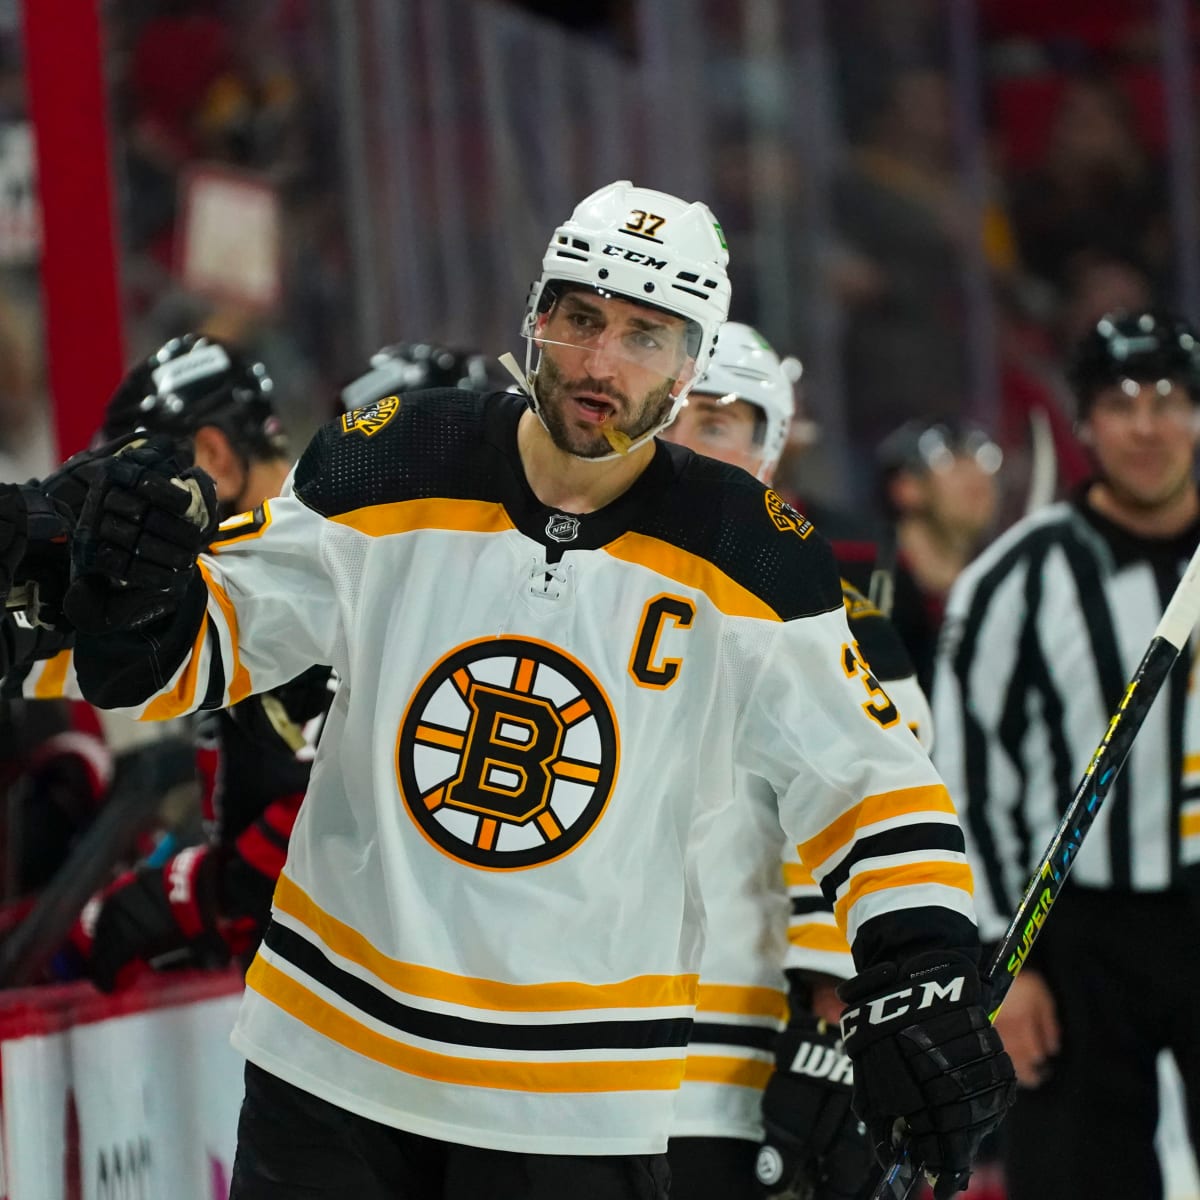 Report: Patrice Bergeron to return to Bruins on one-year deal